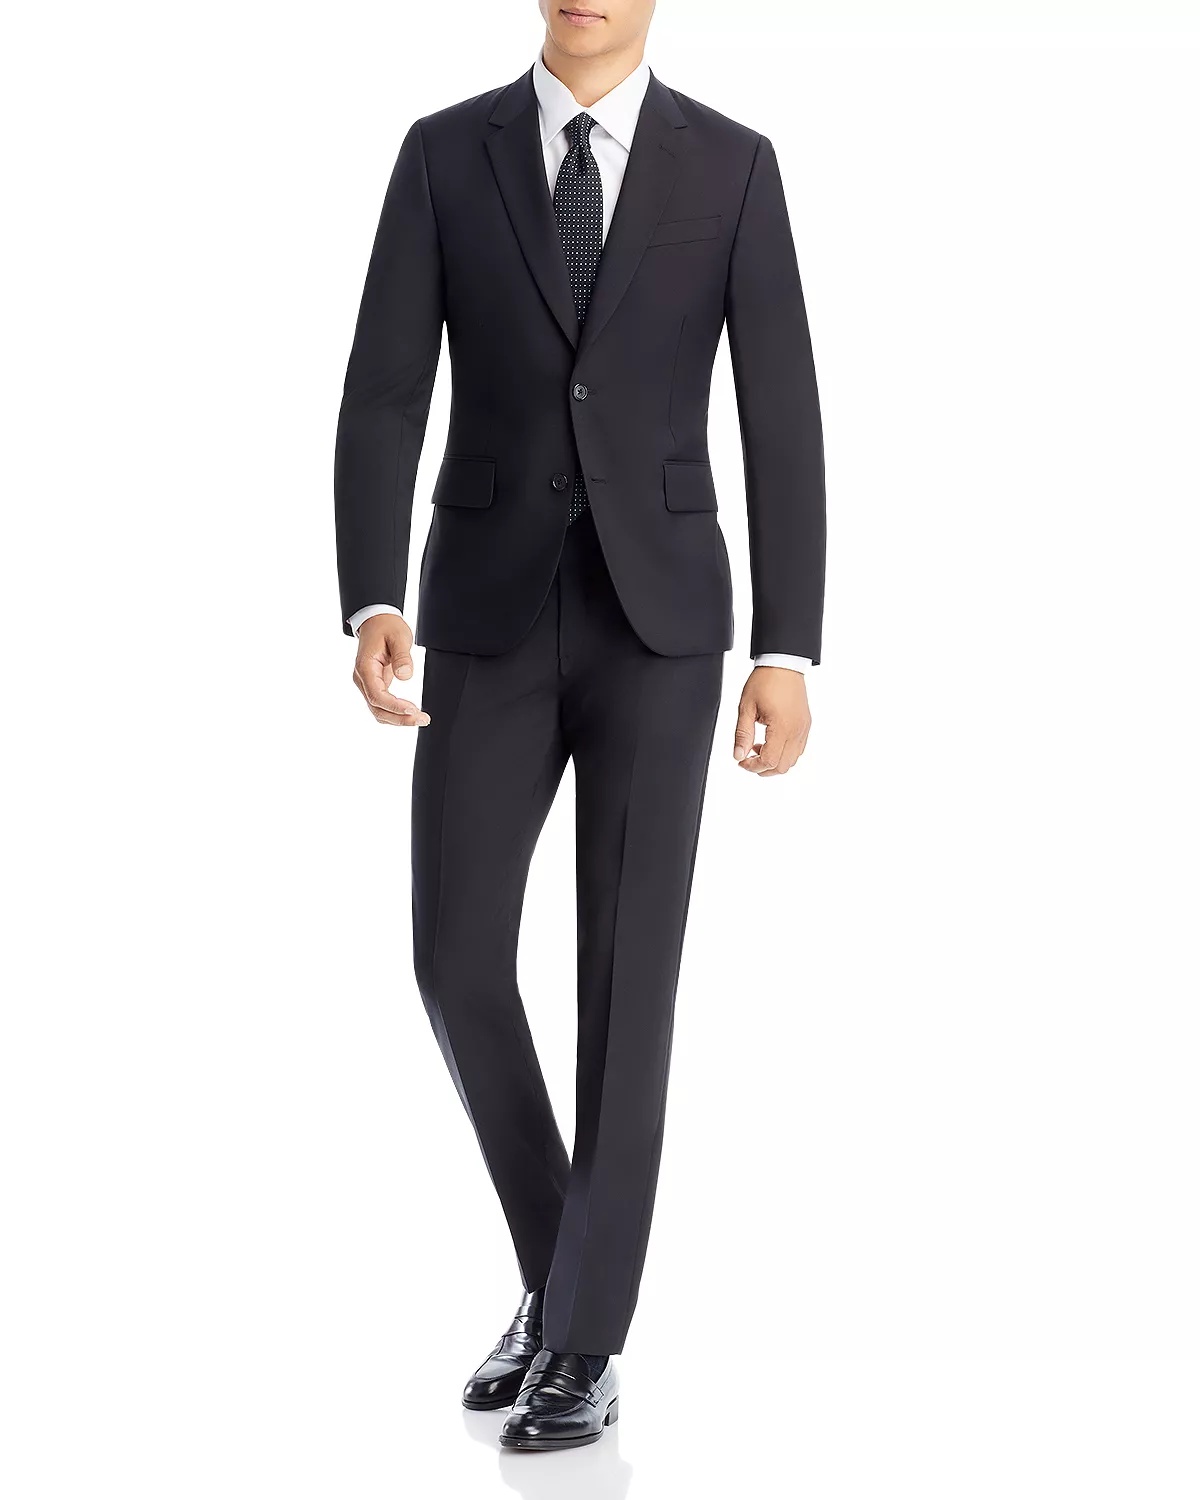 Soho Wool & Mohair Extra Slim Fit Suit - 100% Exclusive - 1